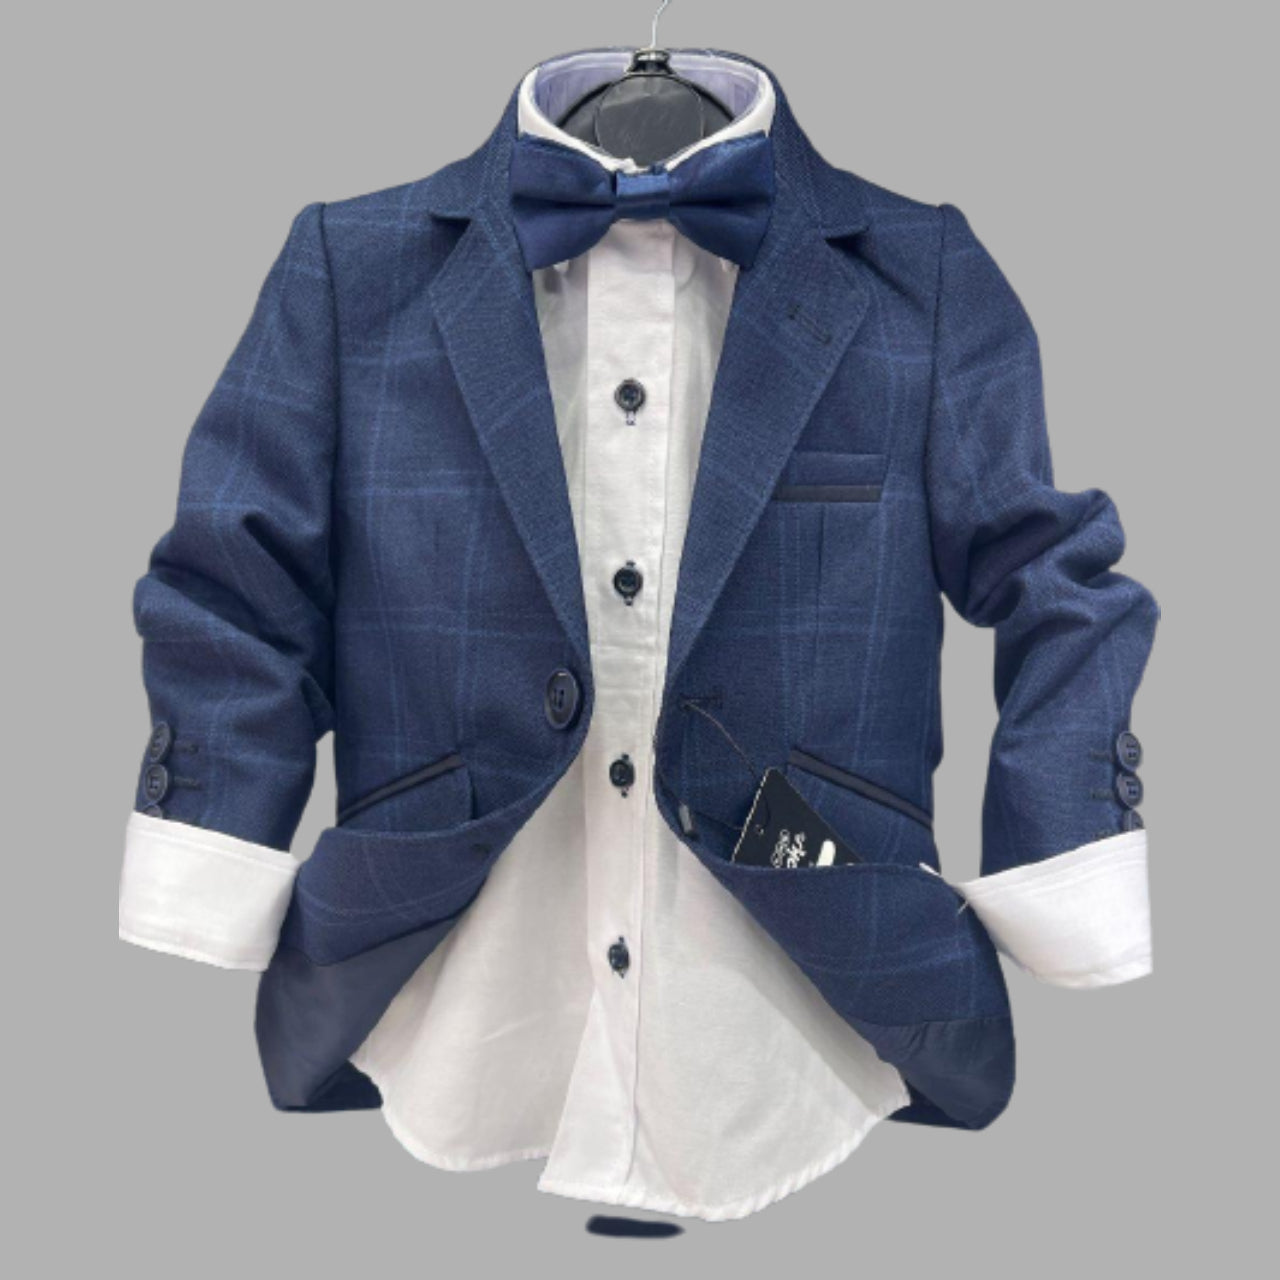 Suits for Boys with Blue Blazer